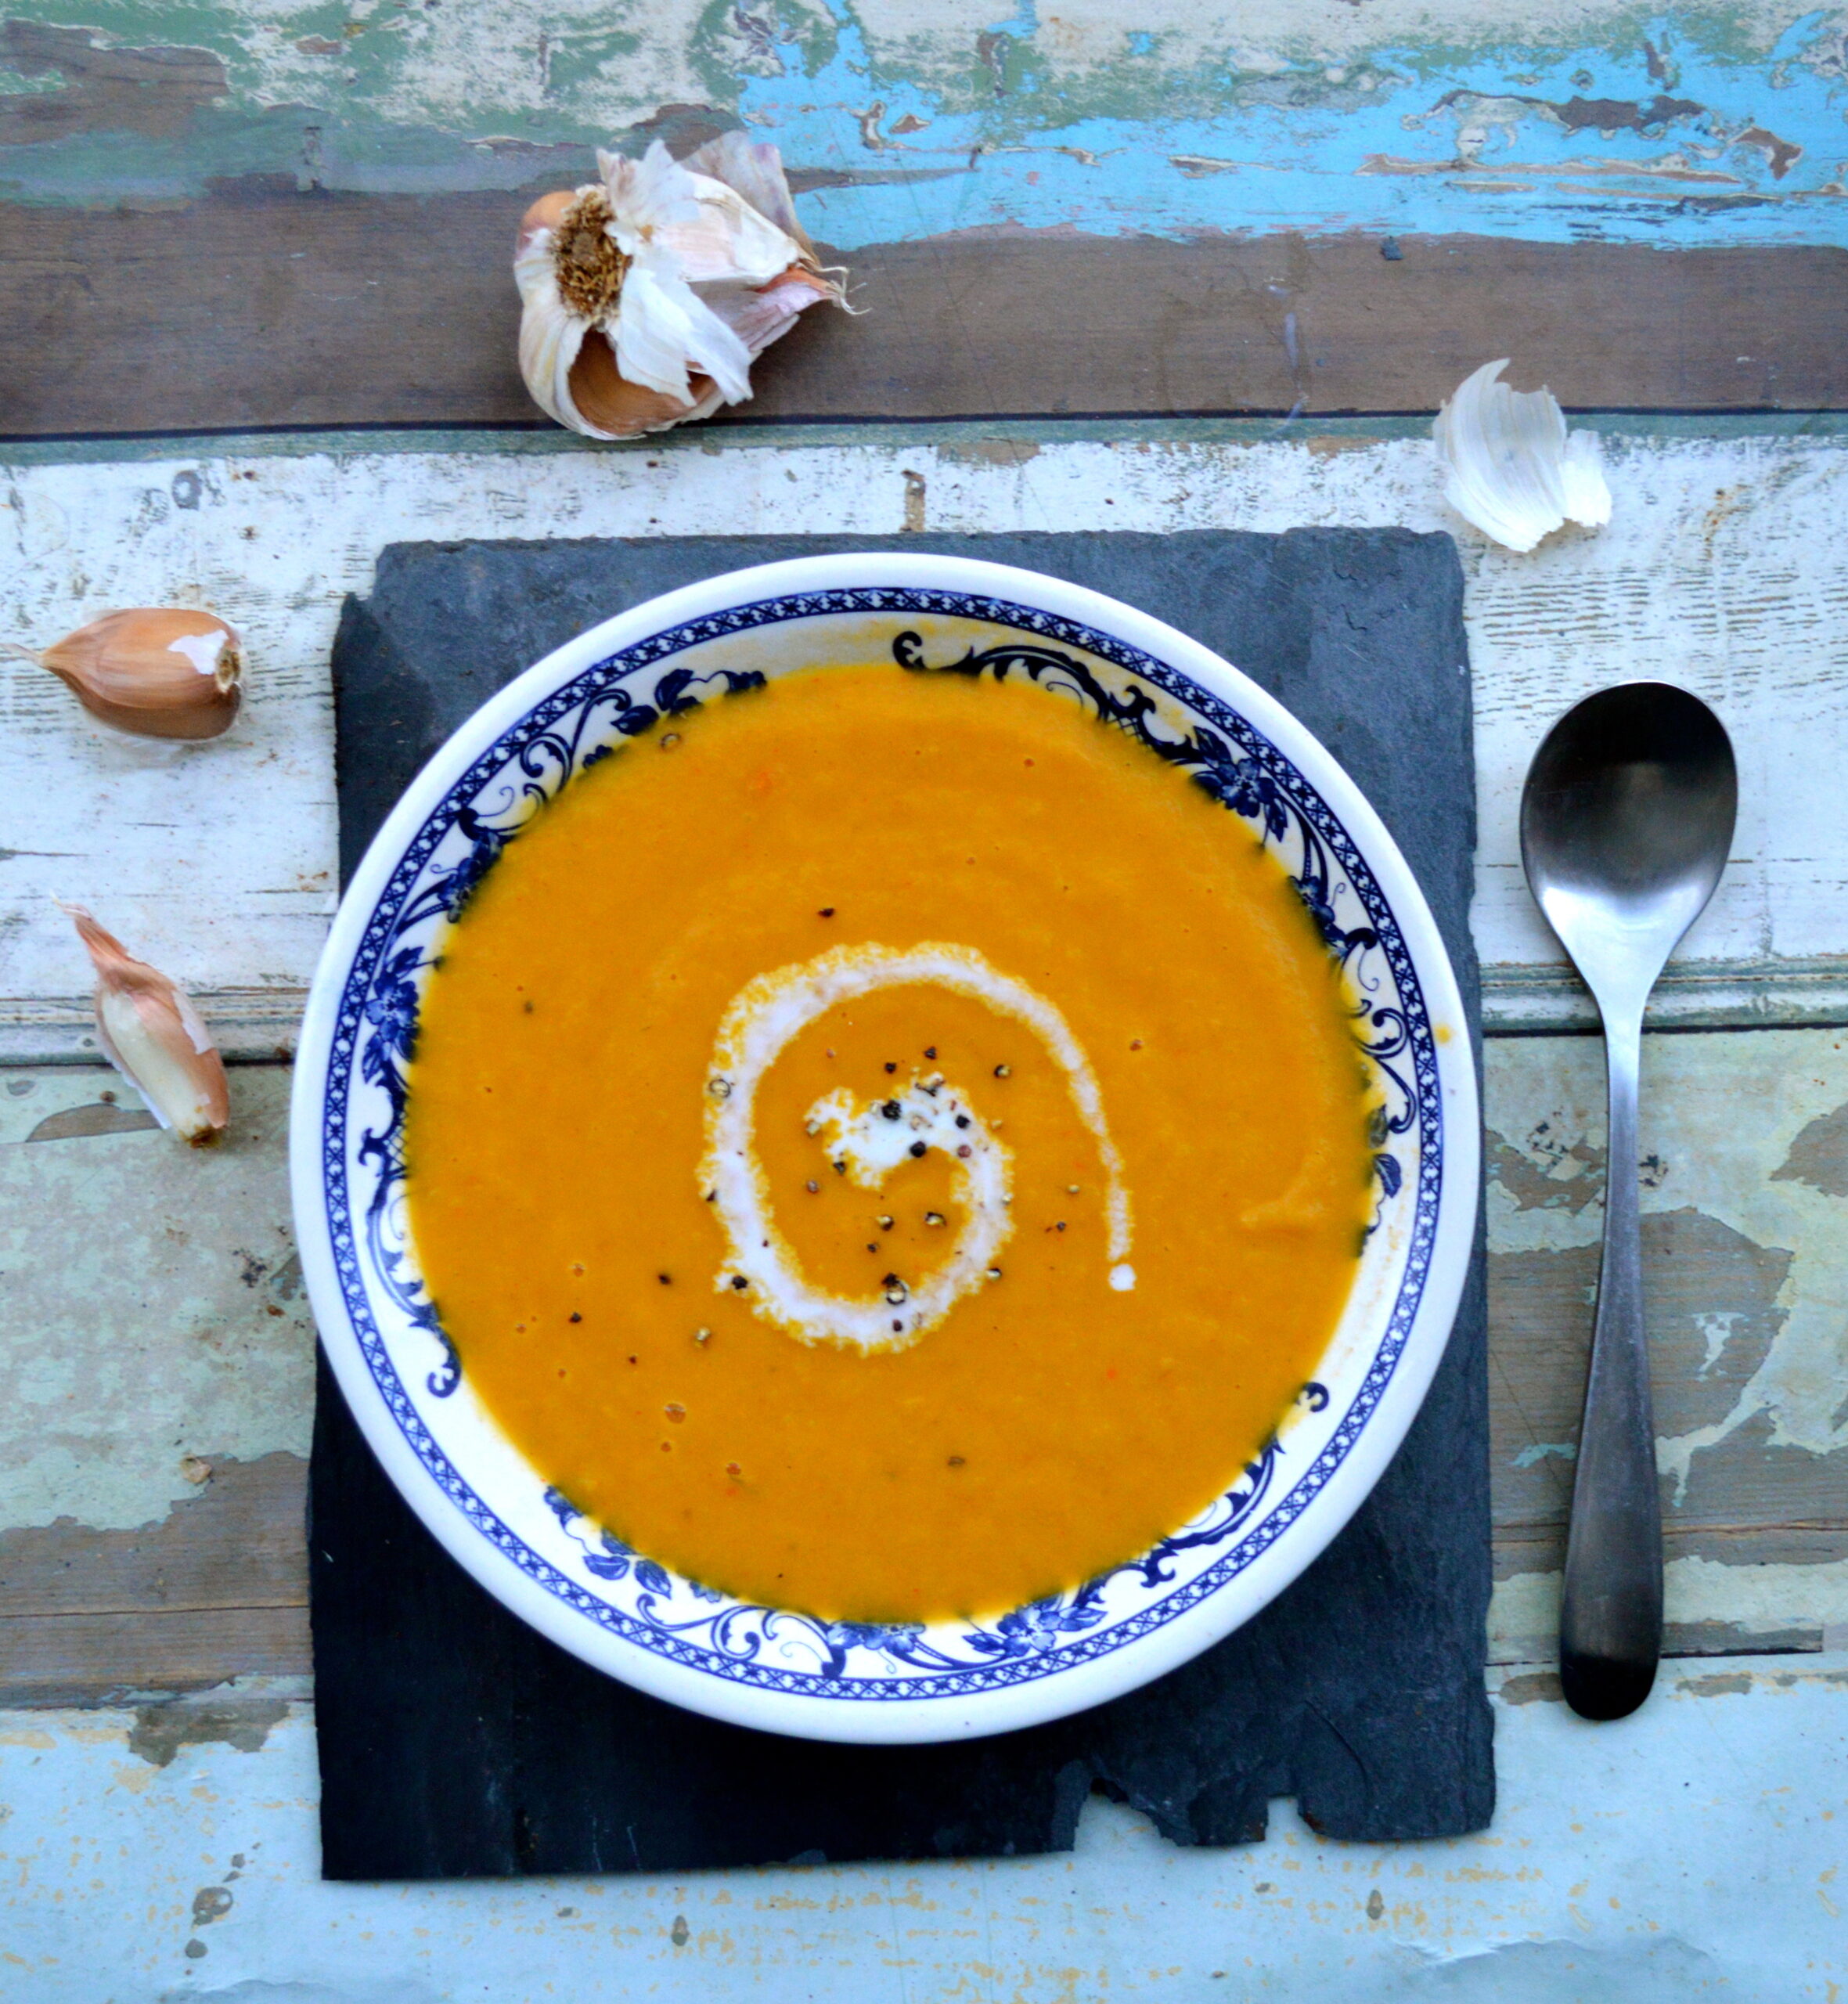 Winter Warming Root Vegetable Soup